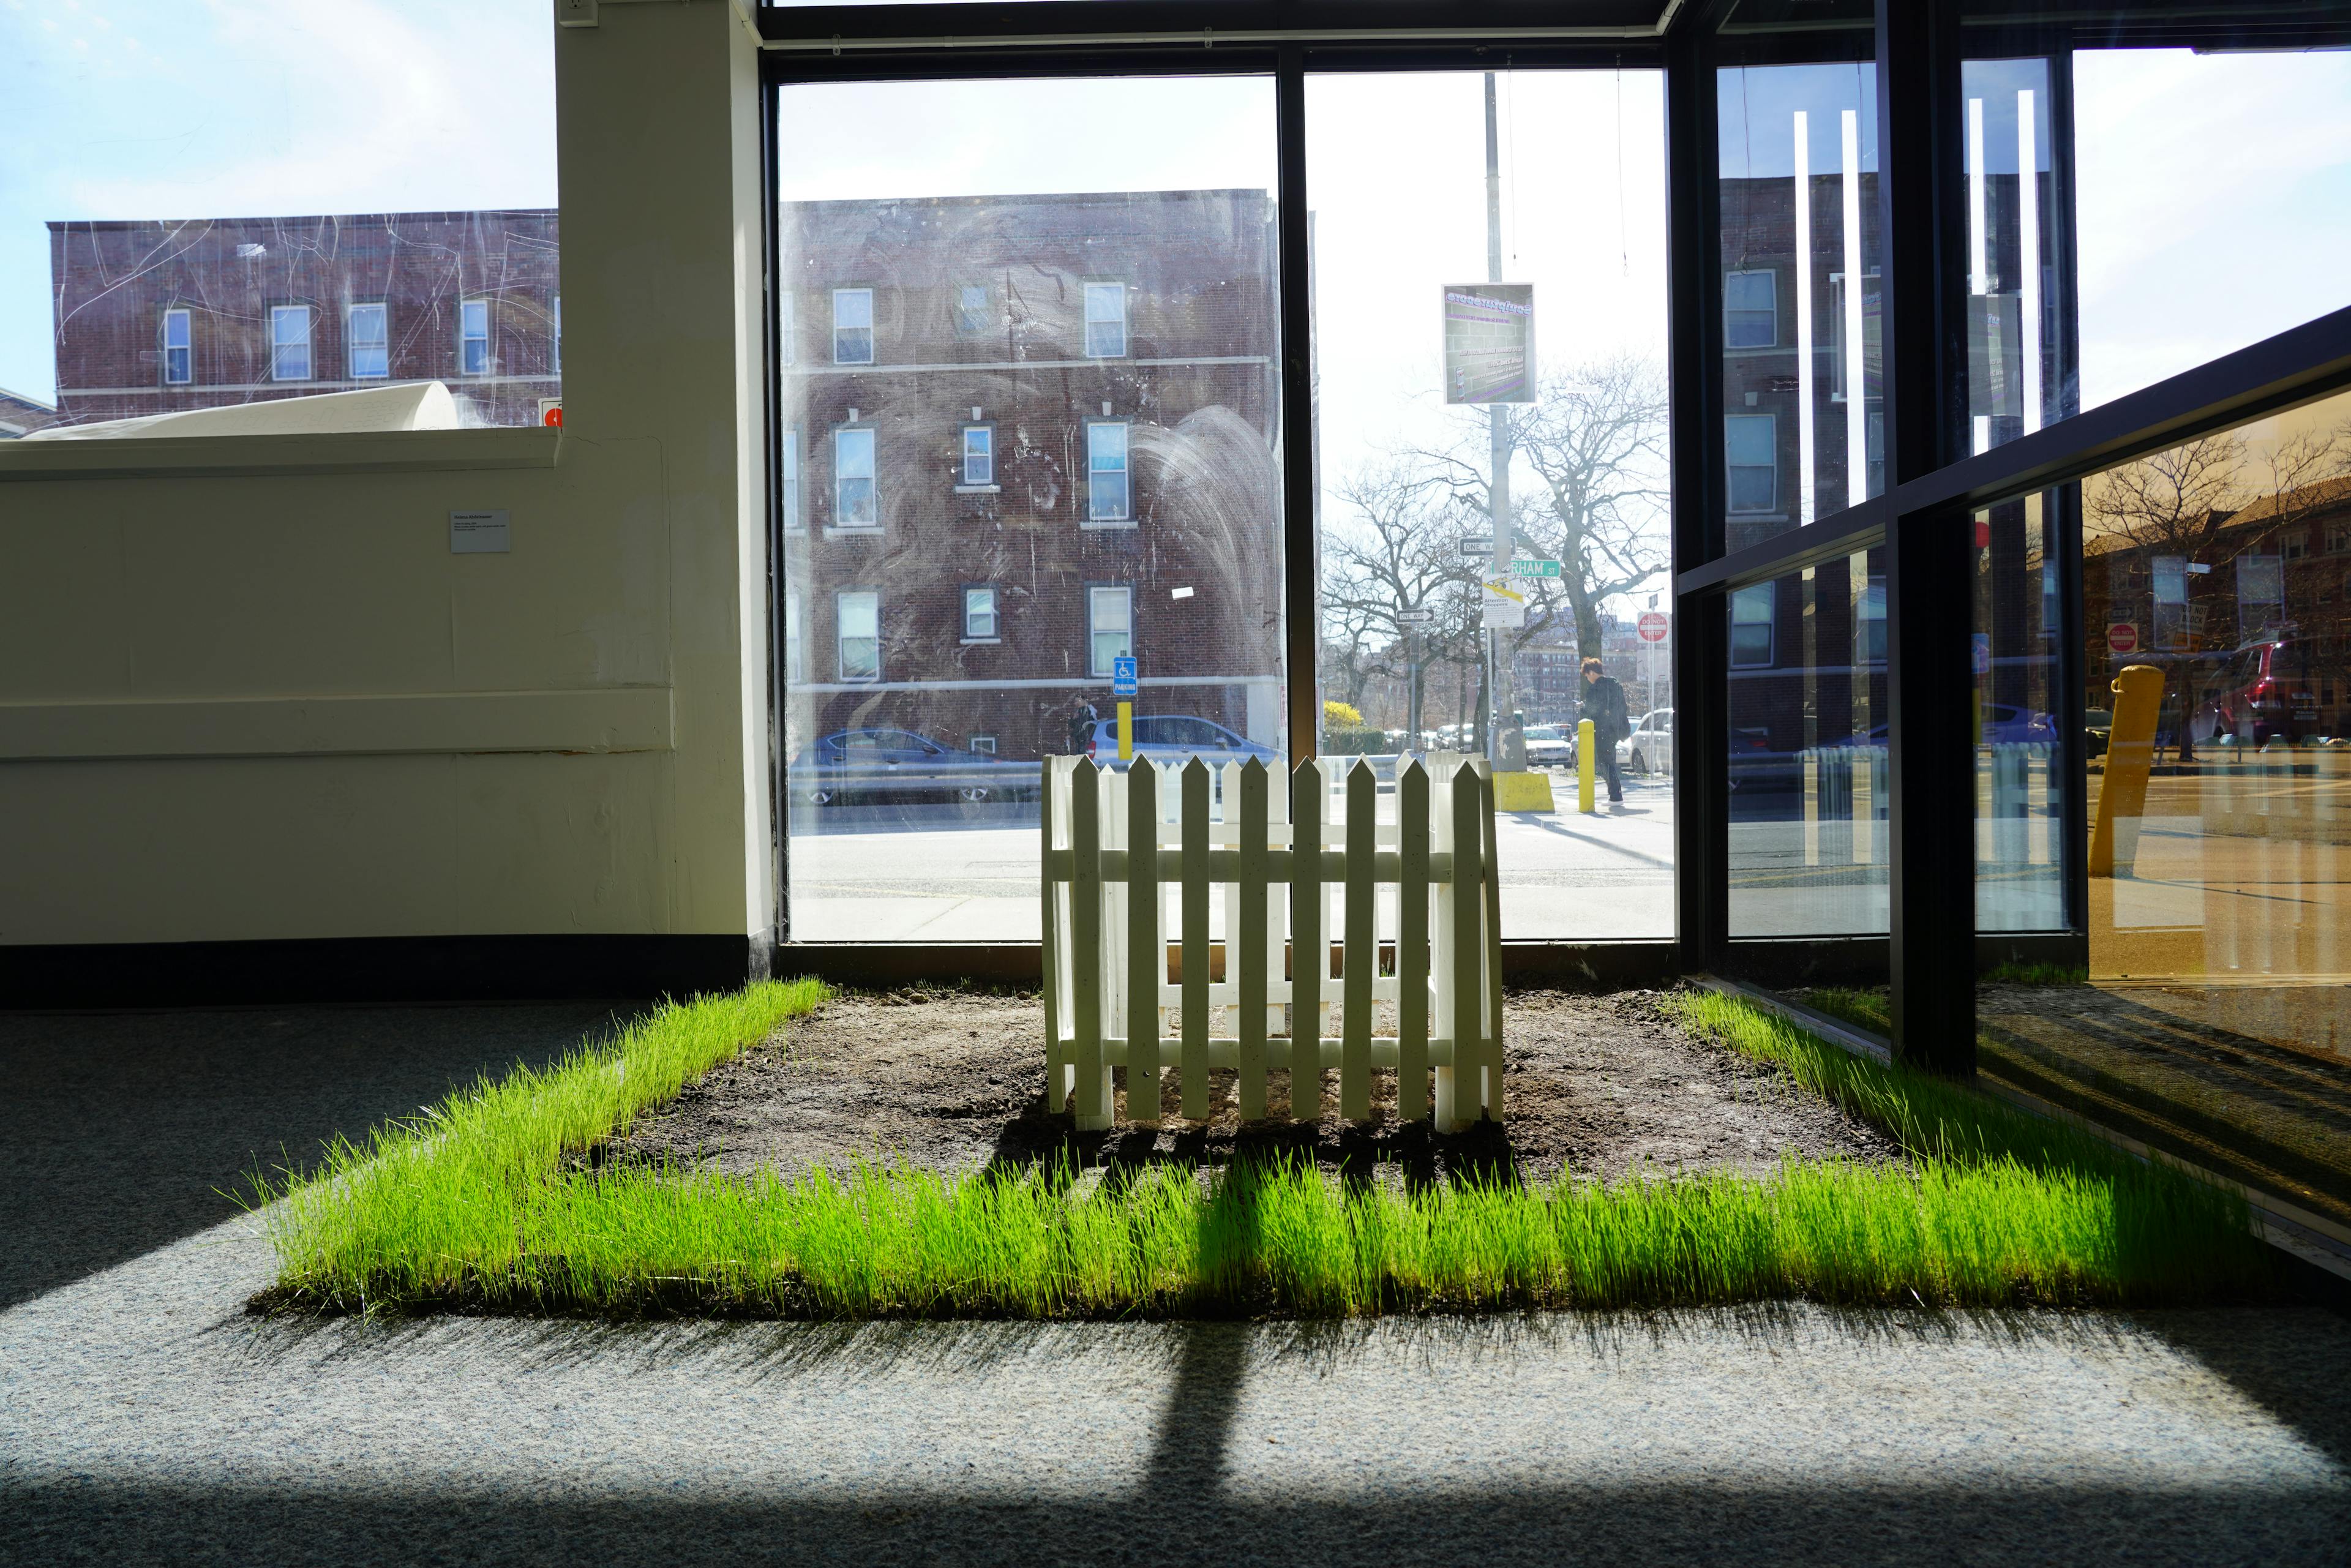 A white picket fence emerges in a patch of green grass in the indoor exhibition space.